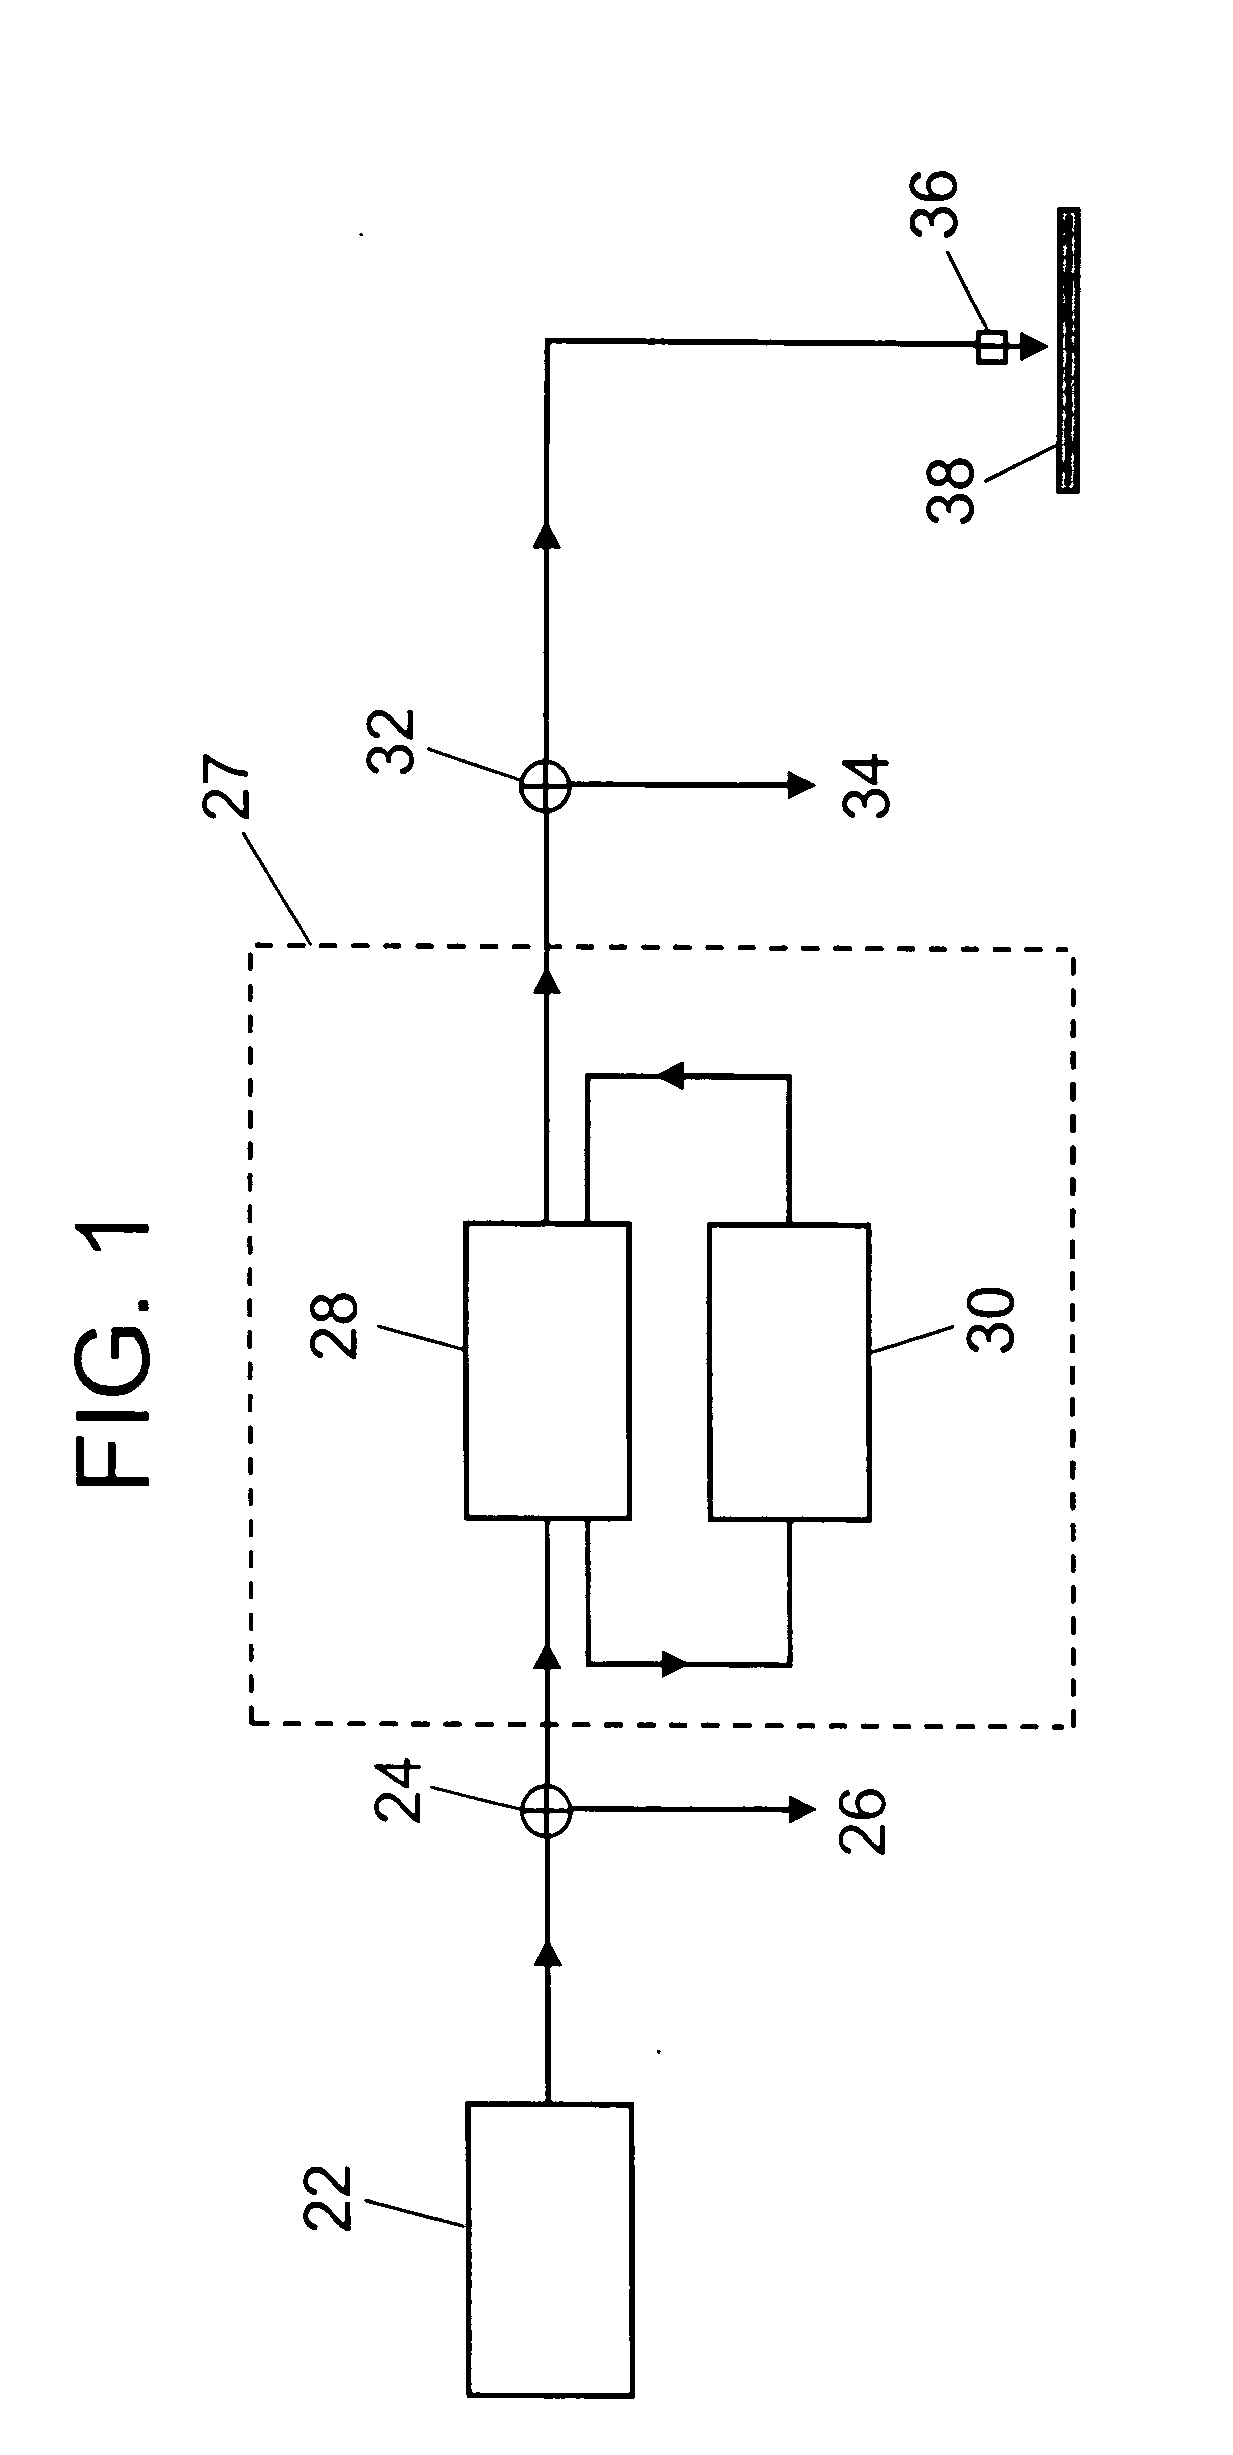 Apparatus for treating a substrate with an ozone-solvent solution